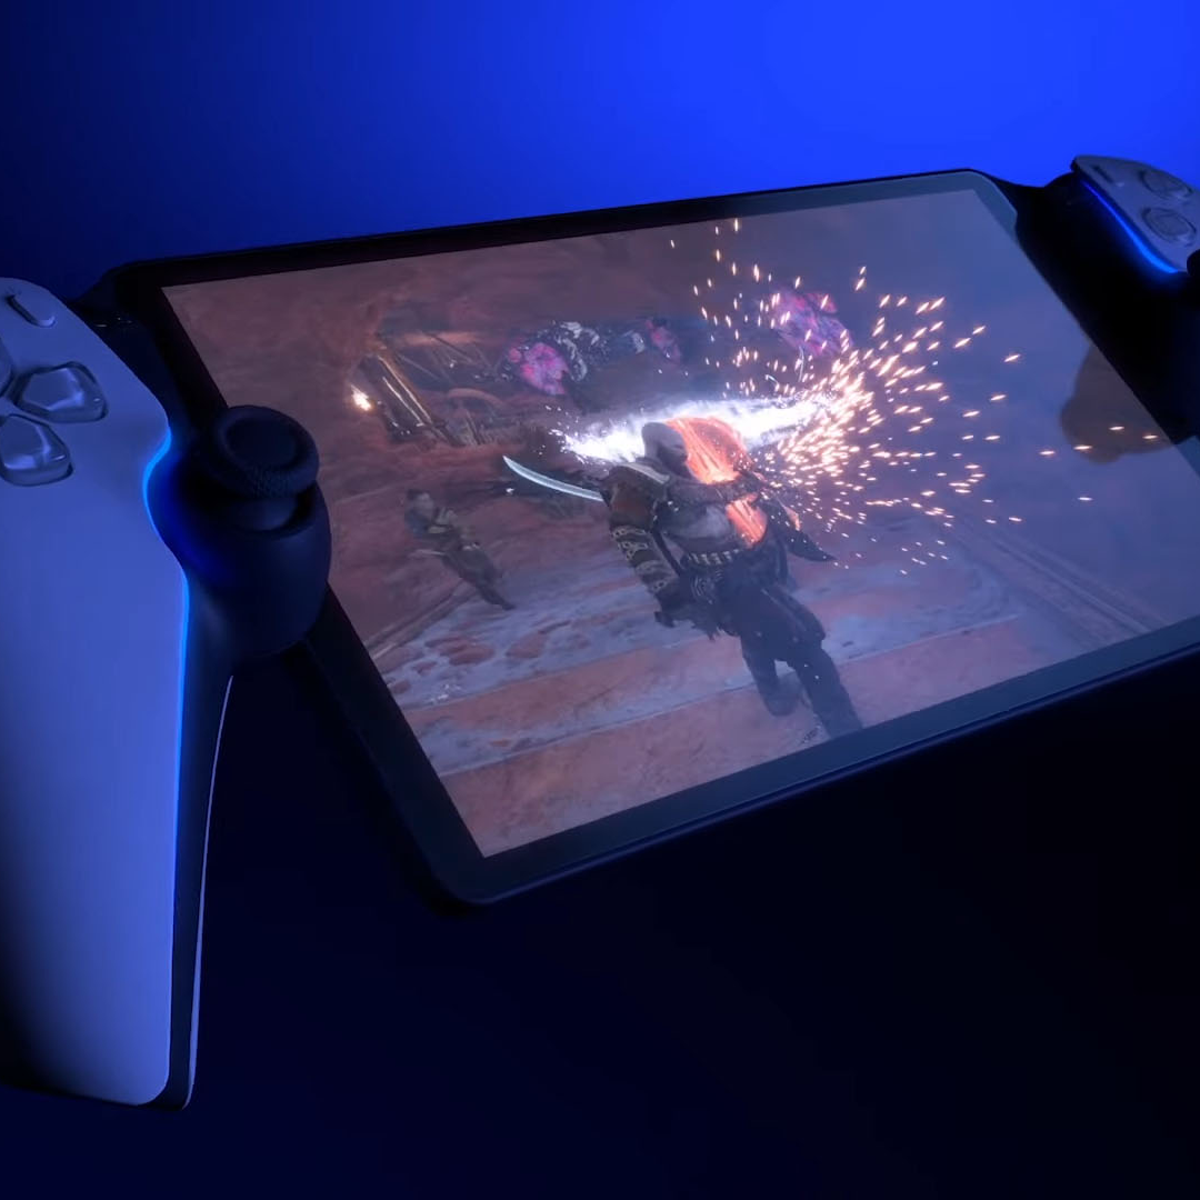 PlayStation announces streaming handheld device Project Q - Eurogamer.net (Picture 1)